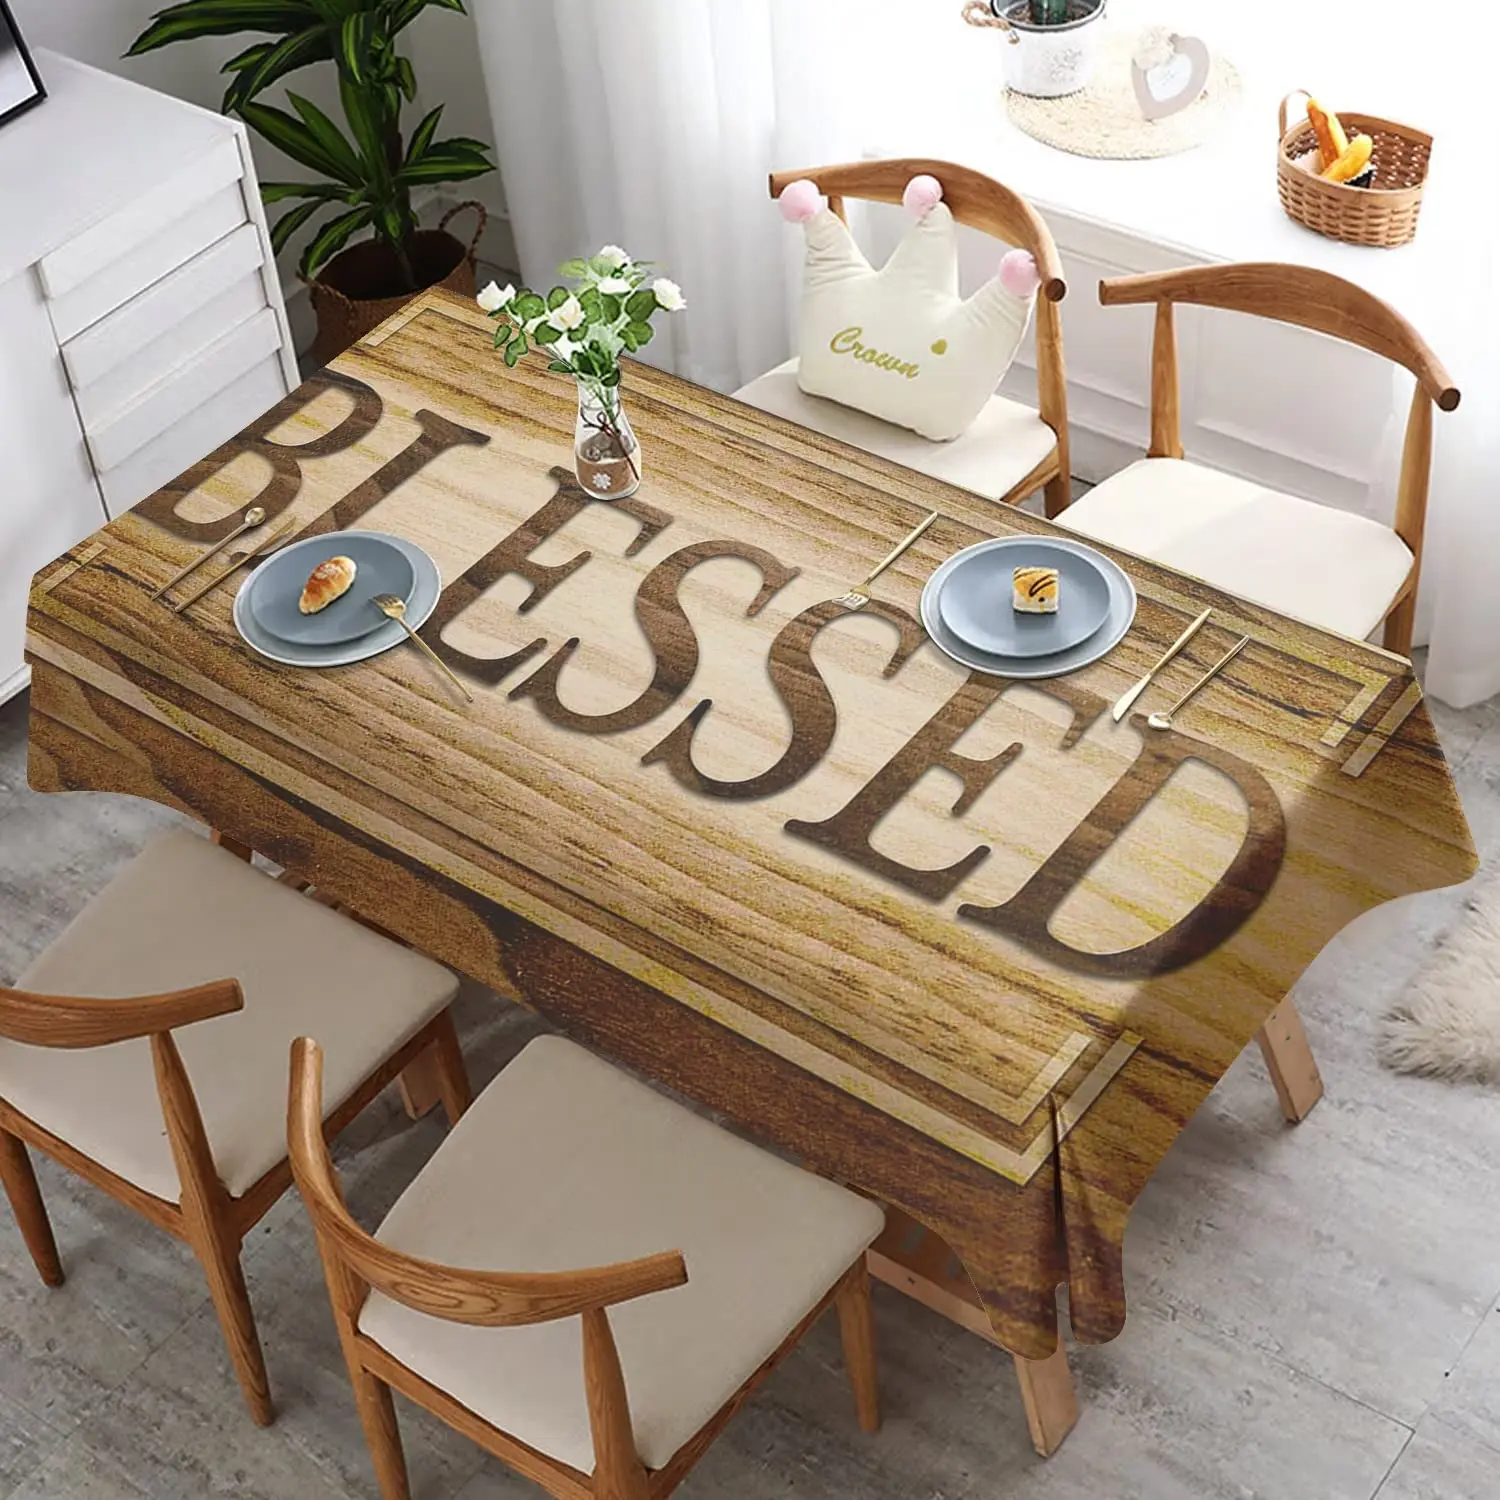 

Wood Grain Blessed Home Printing Rectangle Tablecloth Holiday Party Decorations Waterproof Fabric Tablecloth Kitchen Table Decor